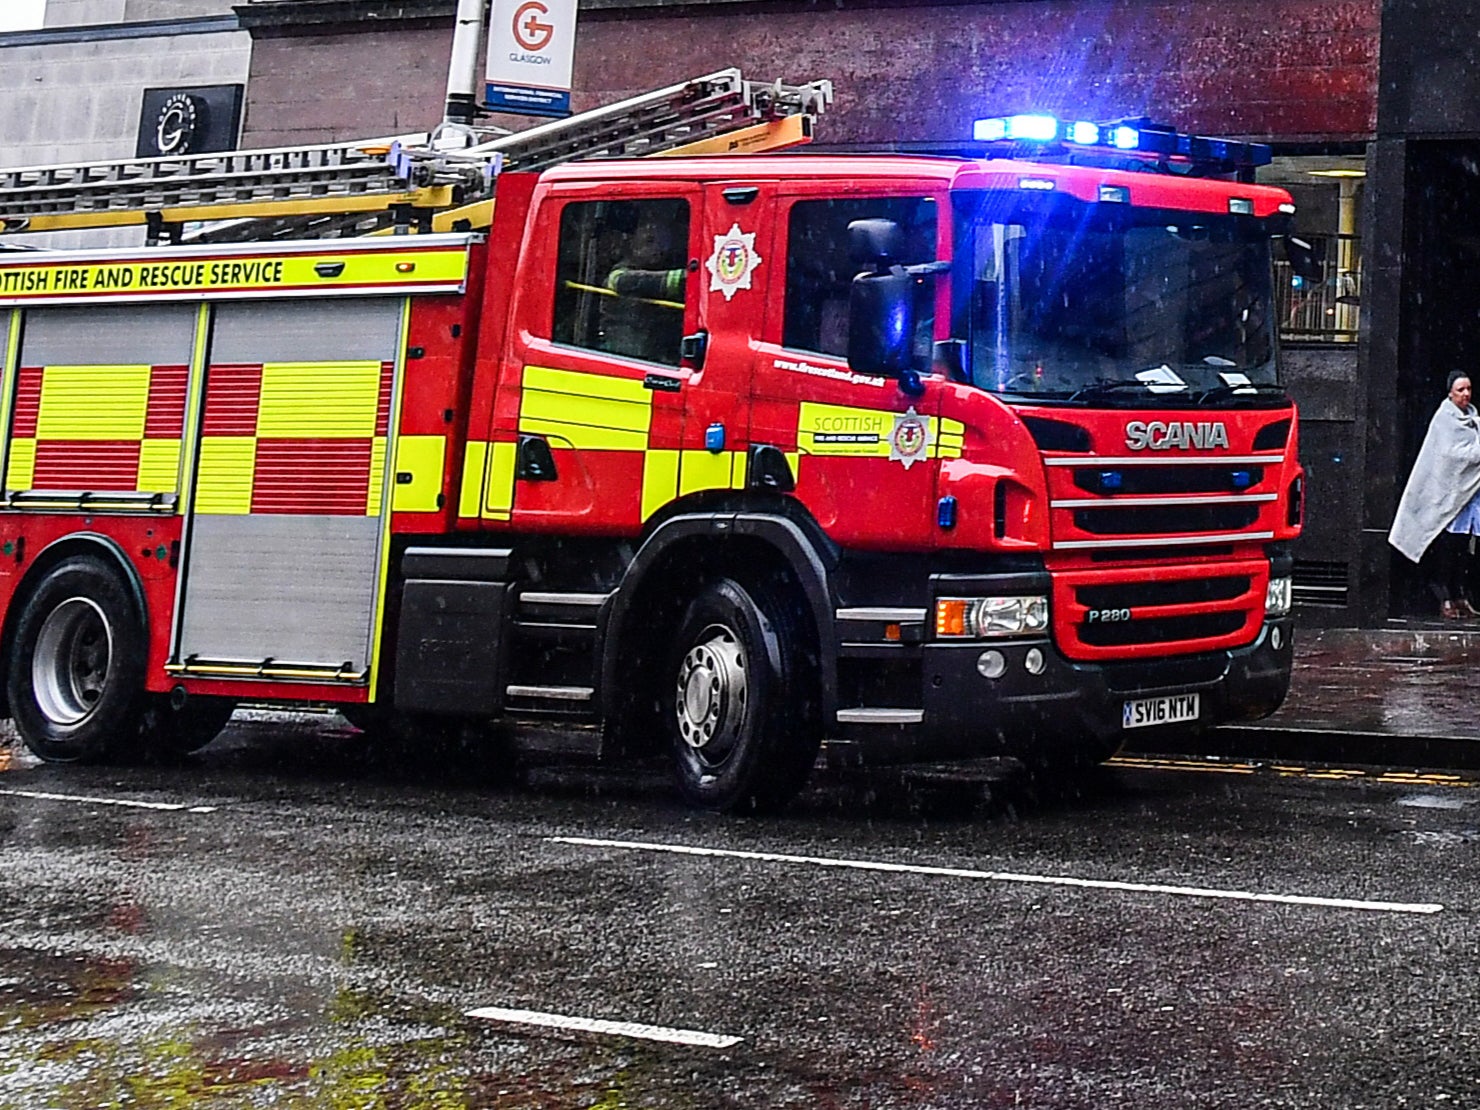 A fire engine from the Scottish Fire and Rescue Service